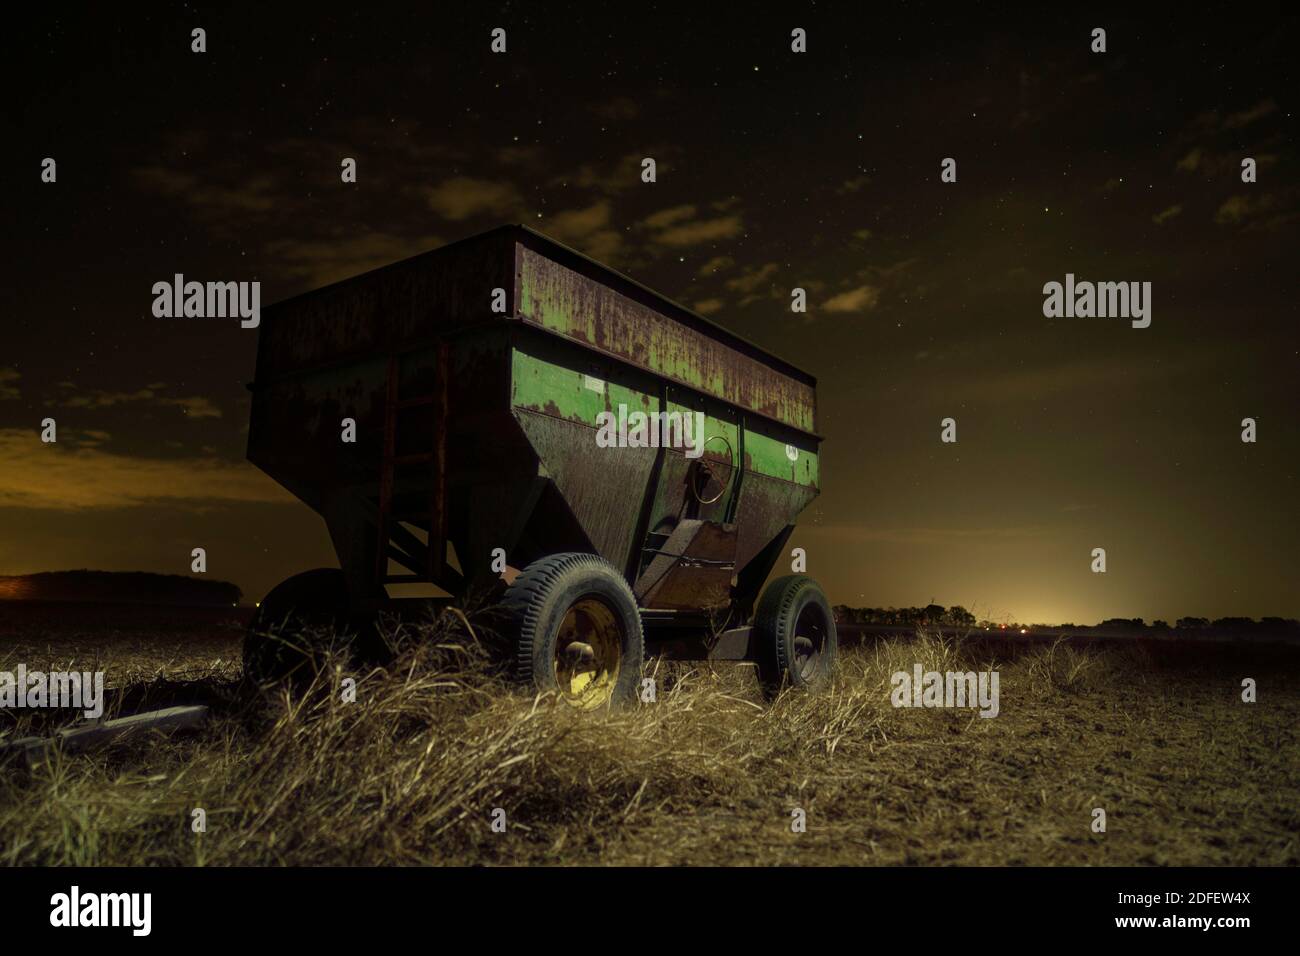 An old gravity wagon used in a small grain operation rests under the stars in a field.  Taken near Cortland, Indiana.  Lighting provided by lume cube. Stock Photo